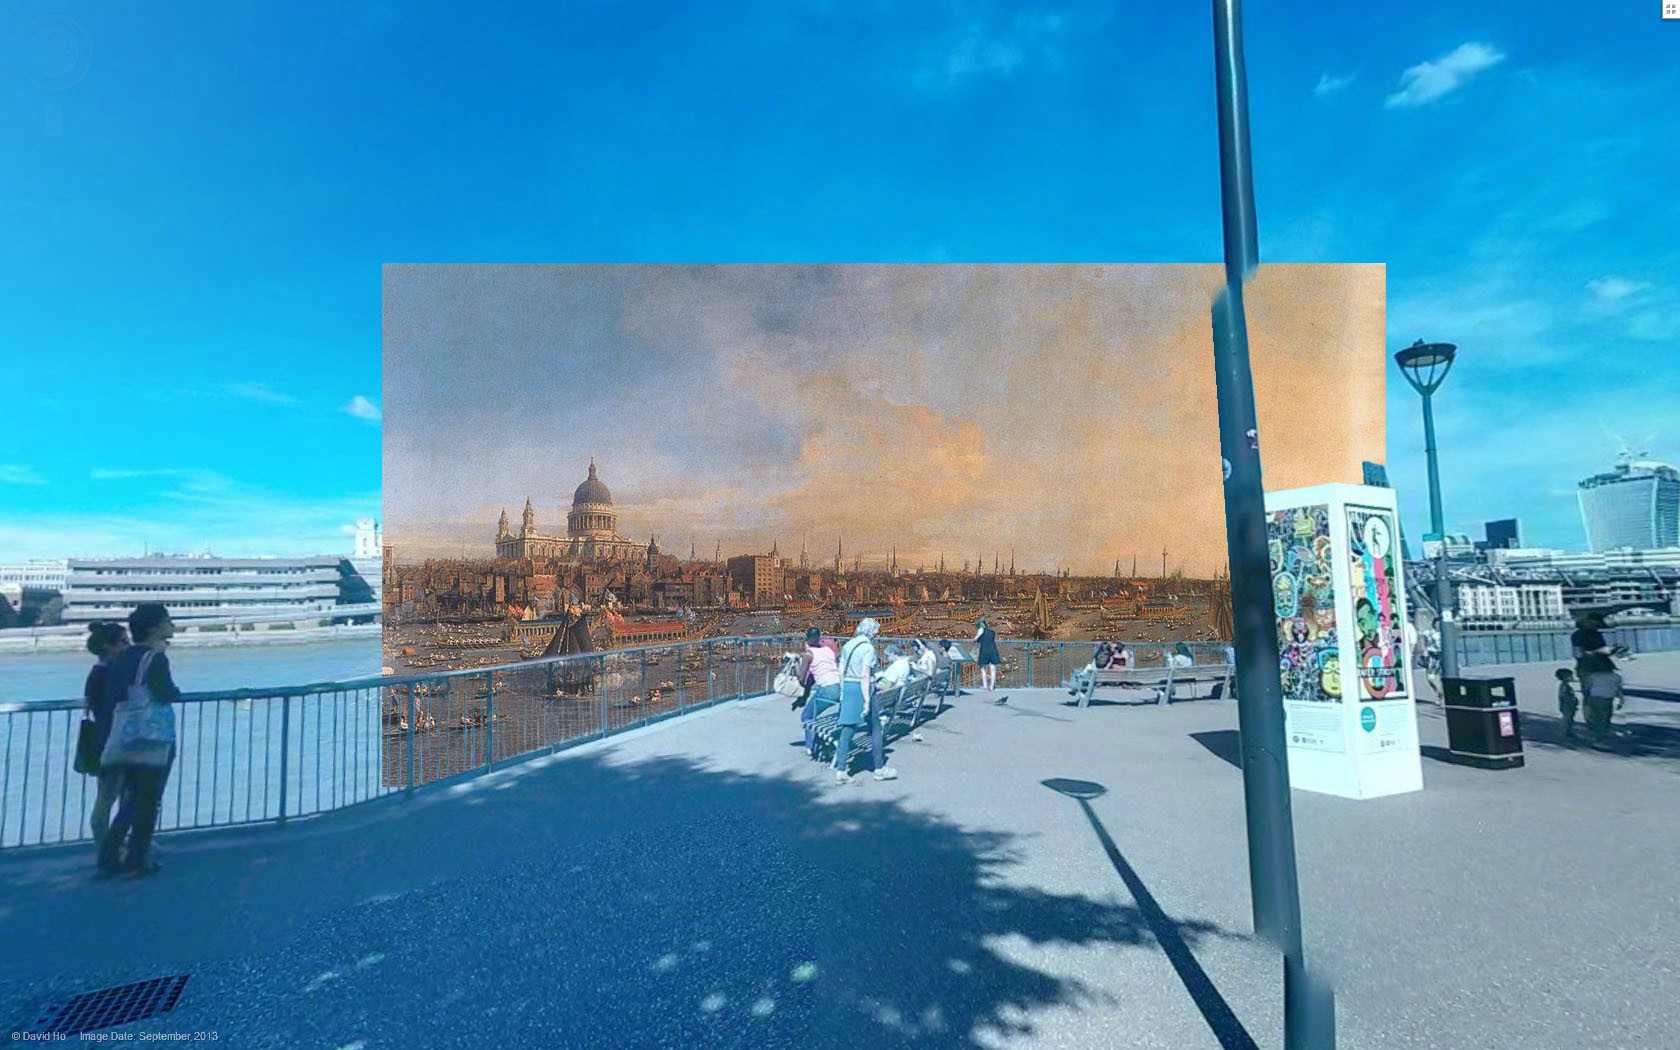 Impressive Images Mix Classic Paintings And Modern London Street Views